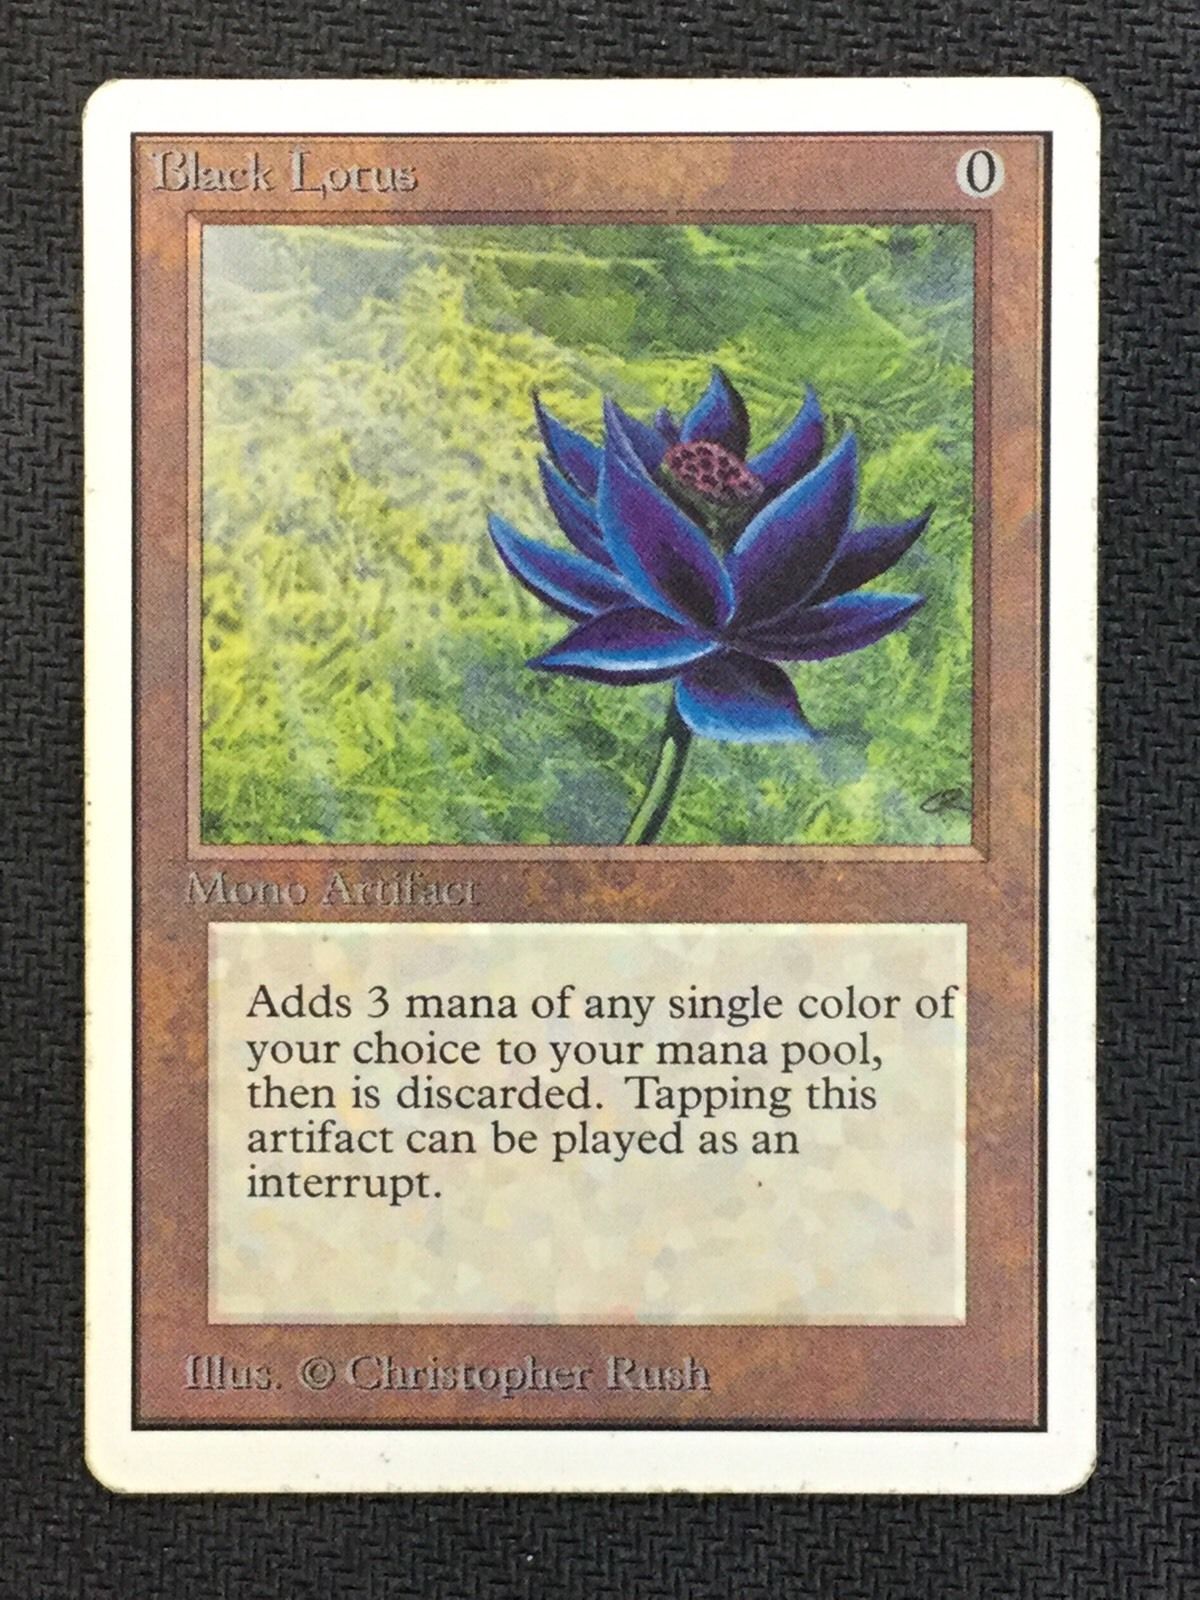 Two Magic: The Gathering Artists Pass Away | File 770